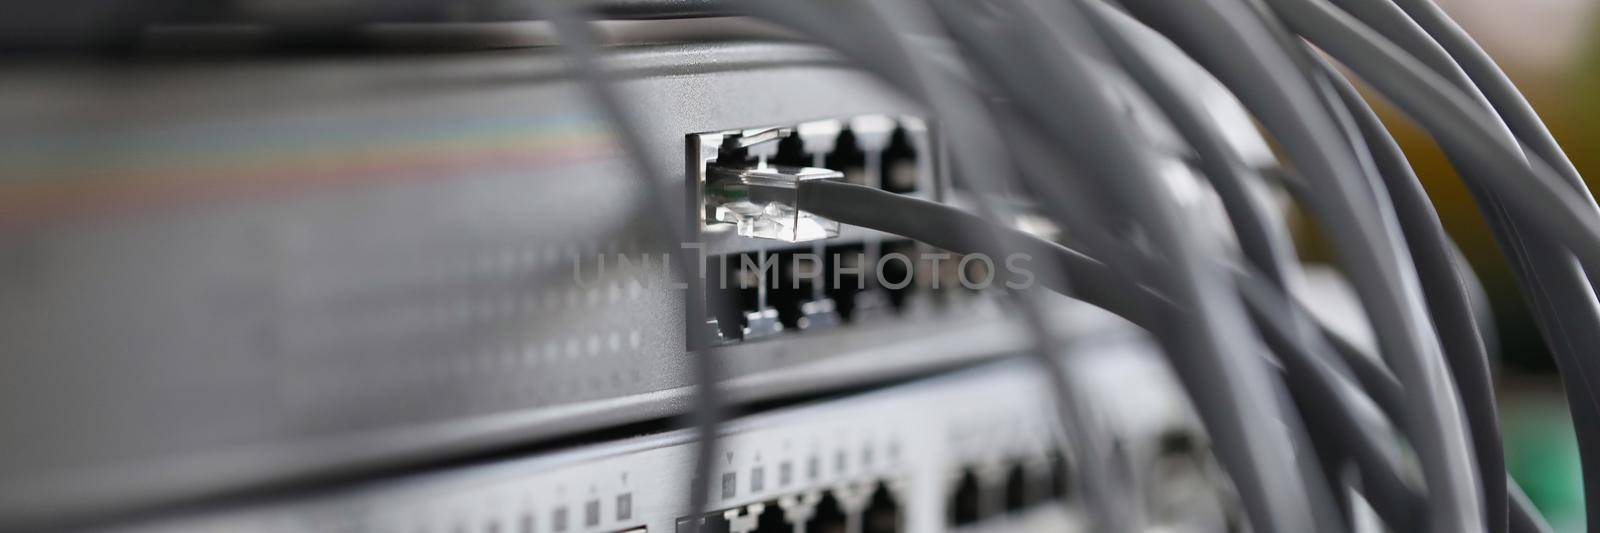 Optical mains cables connected to main server closeup. Telecommunication concept